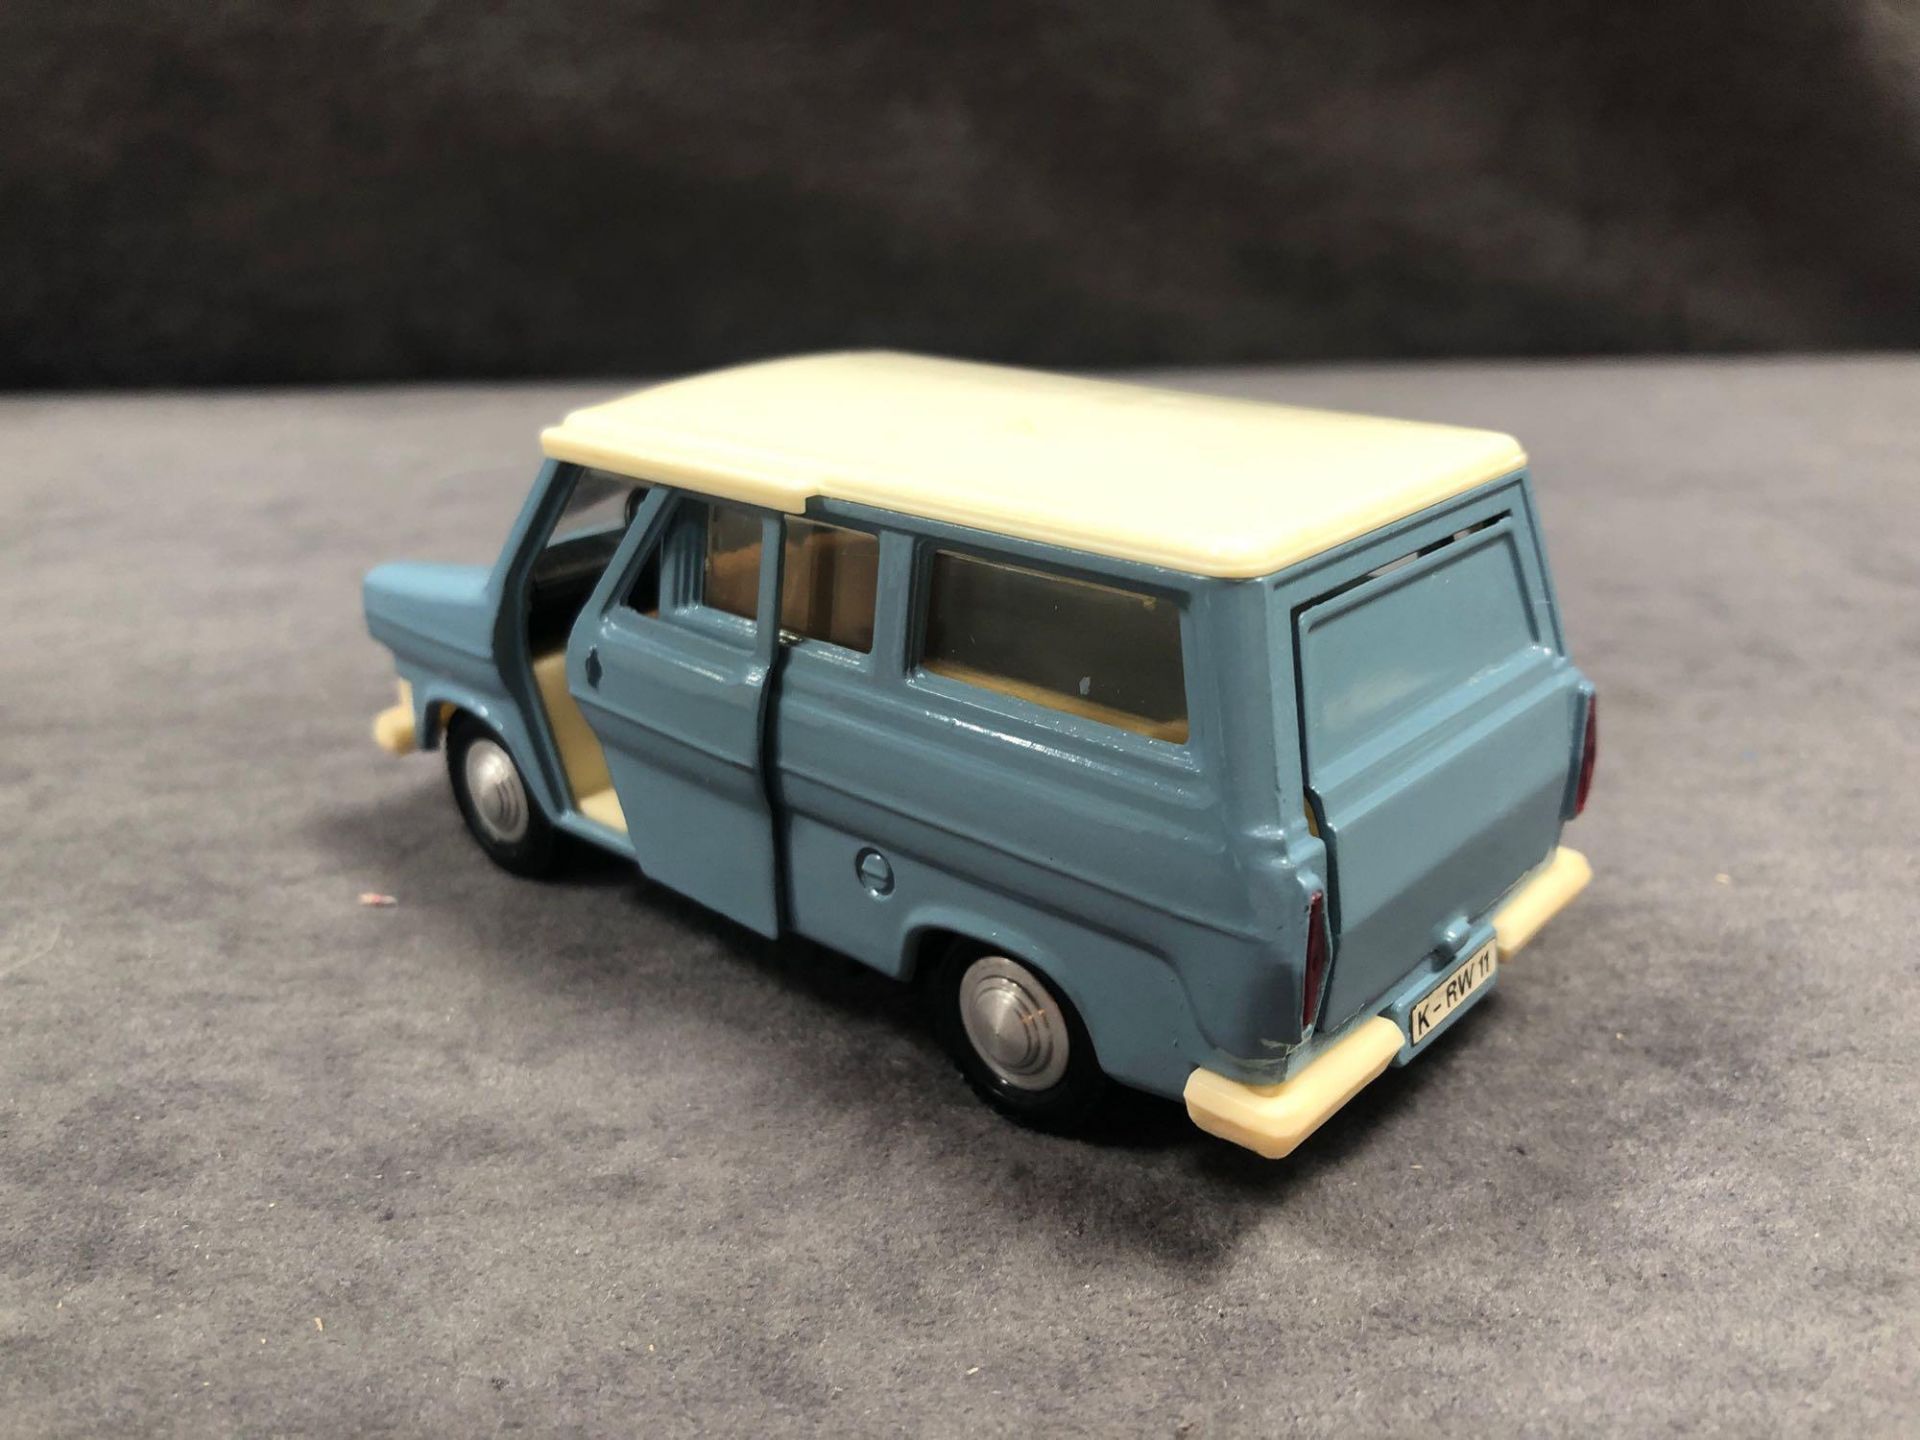 R.W.-Modell (Germany) #400 Ford Transit Kombi In Box - Image 3 of 3